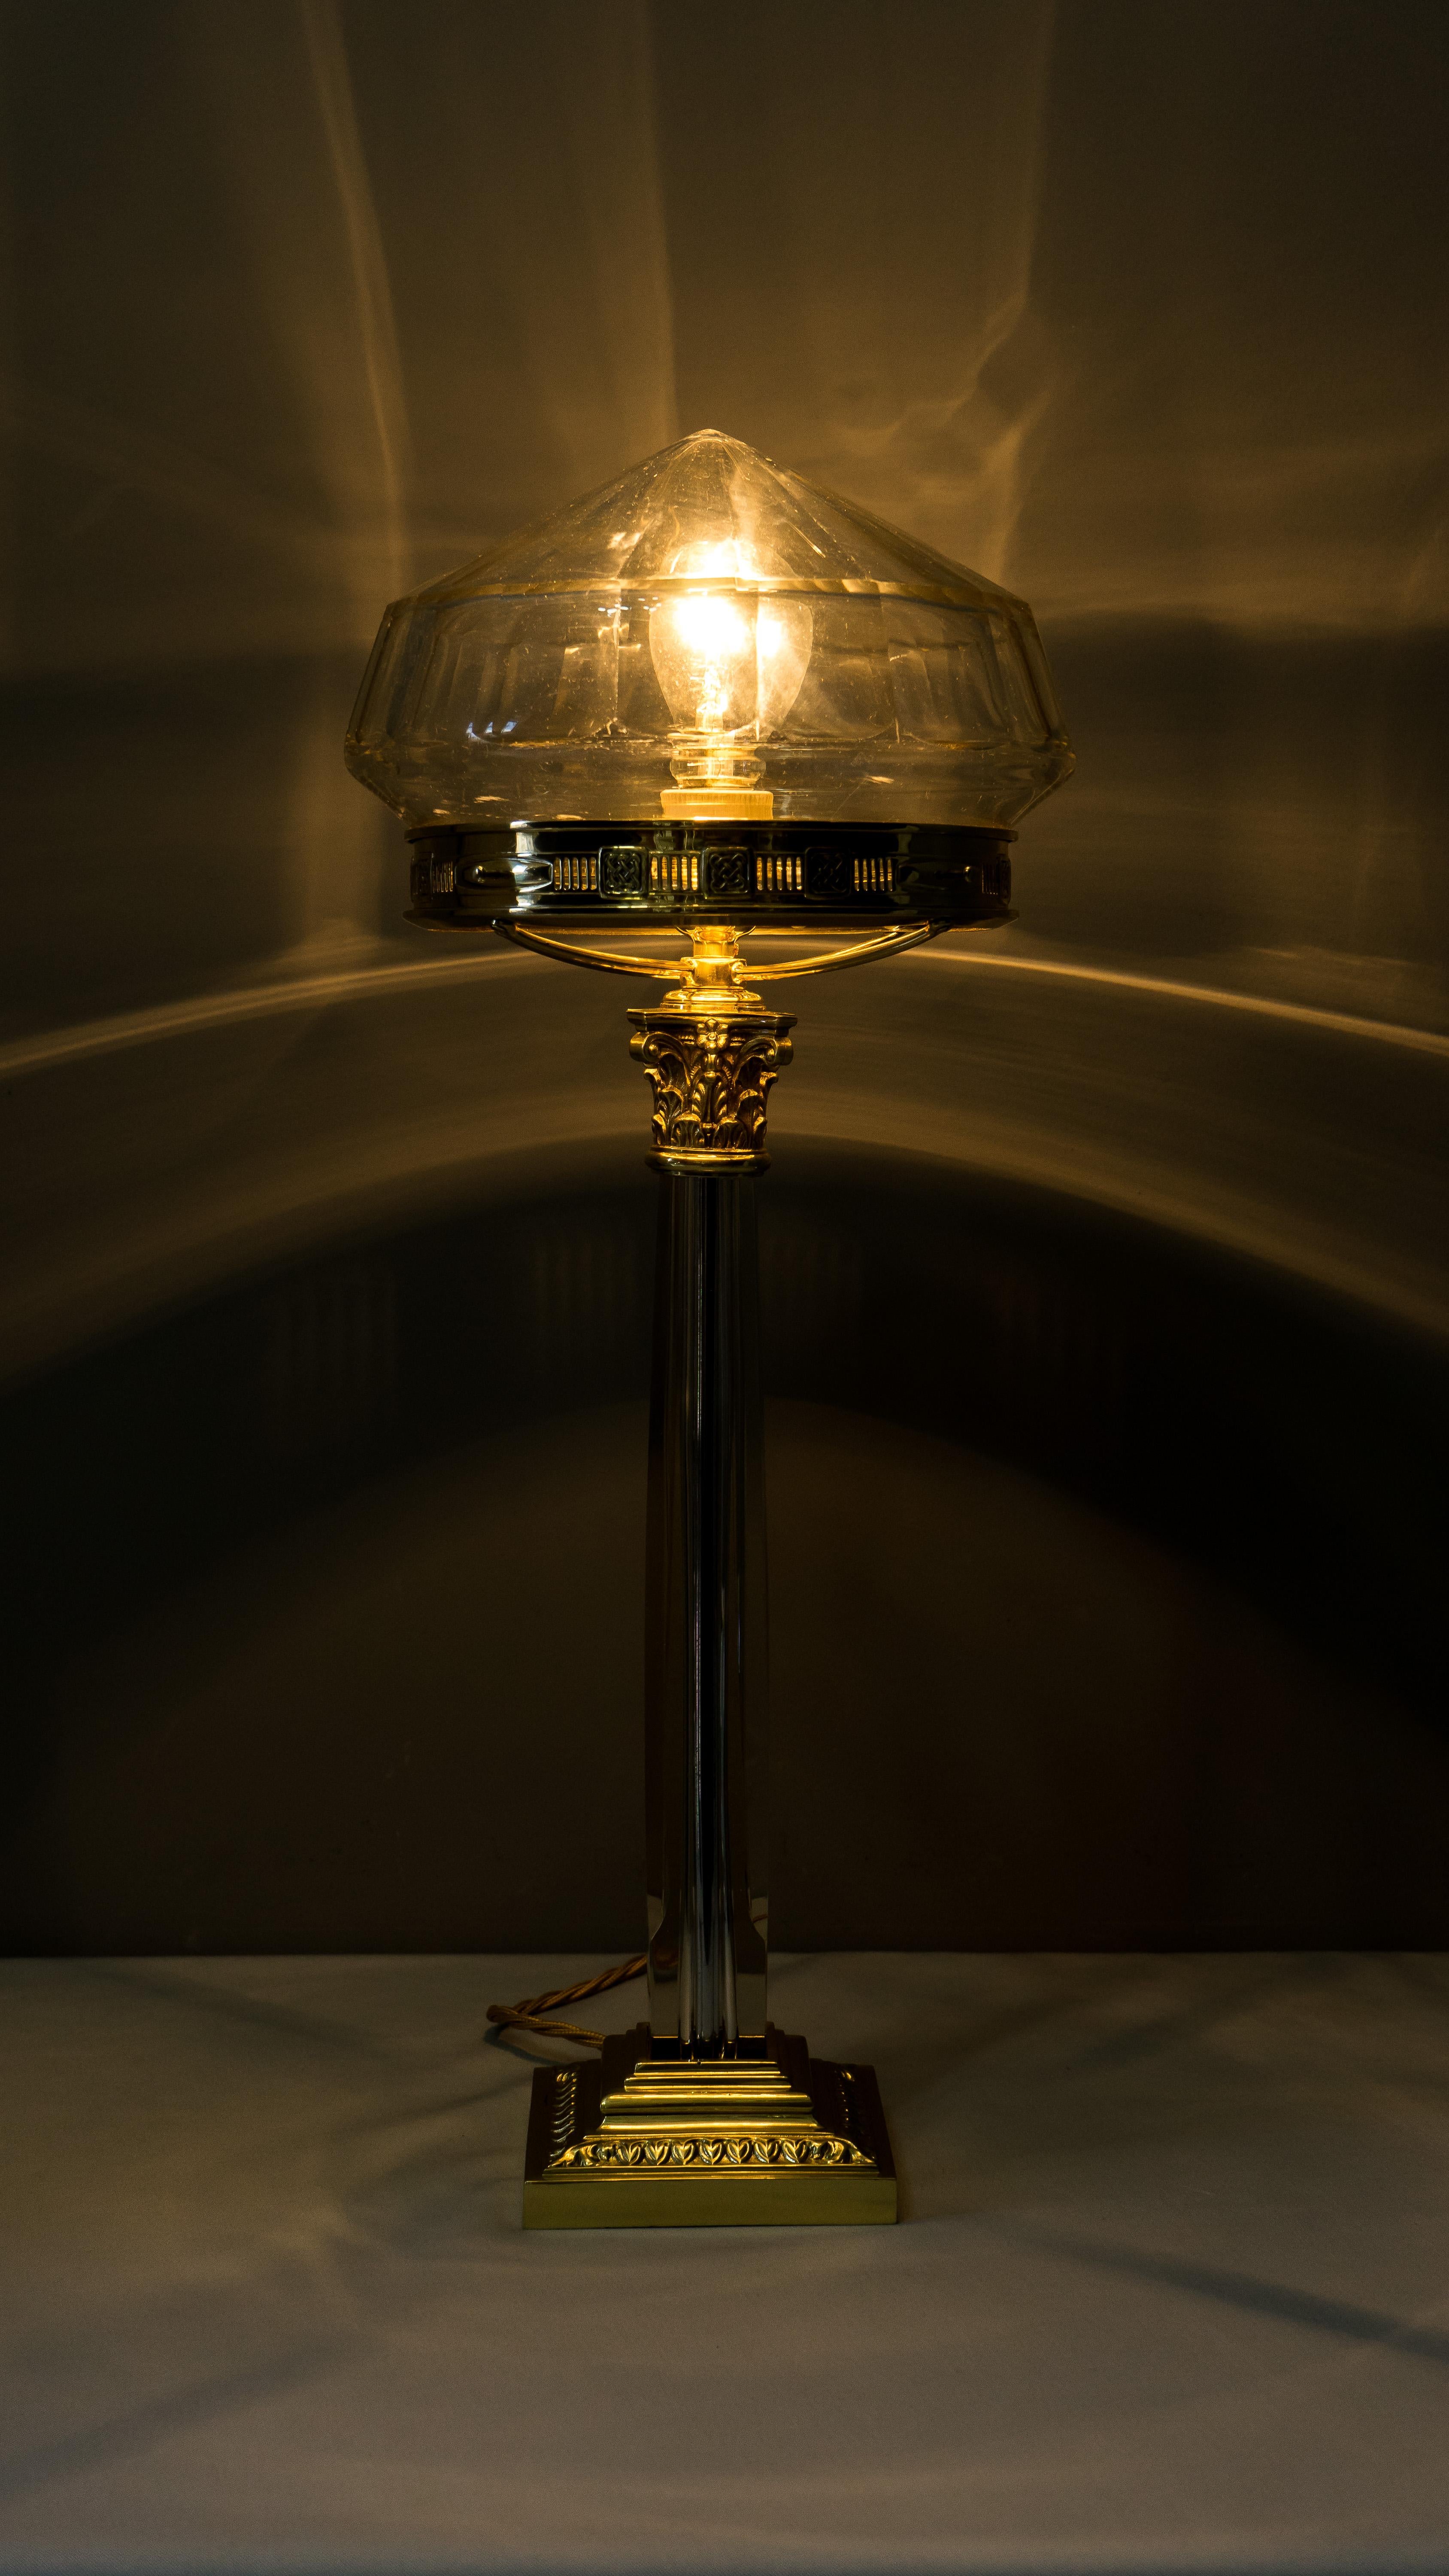 Austrian Big Jugendstil Table Lamp with Cut Glass Shade, Vienna, 1908s For Sale